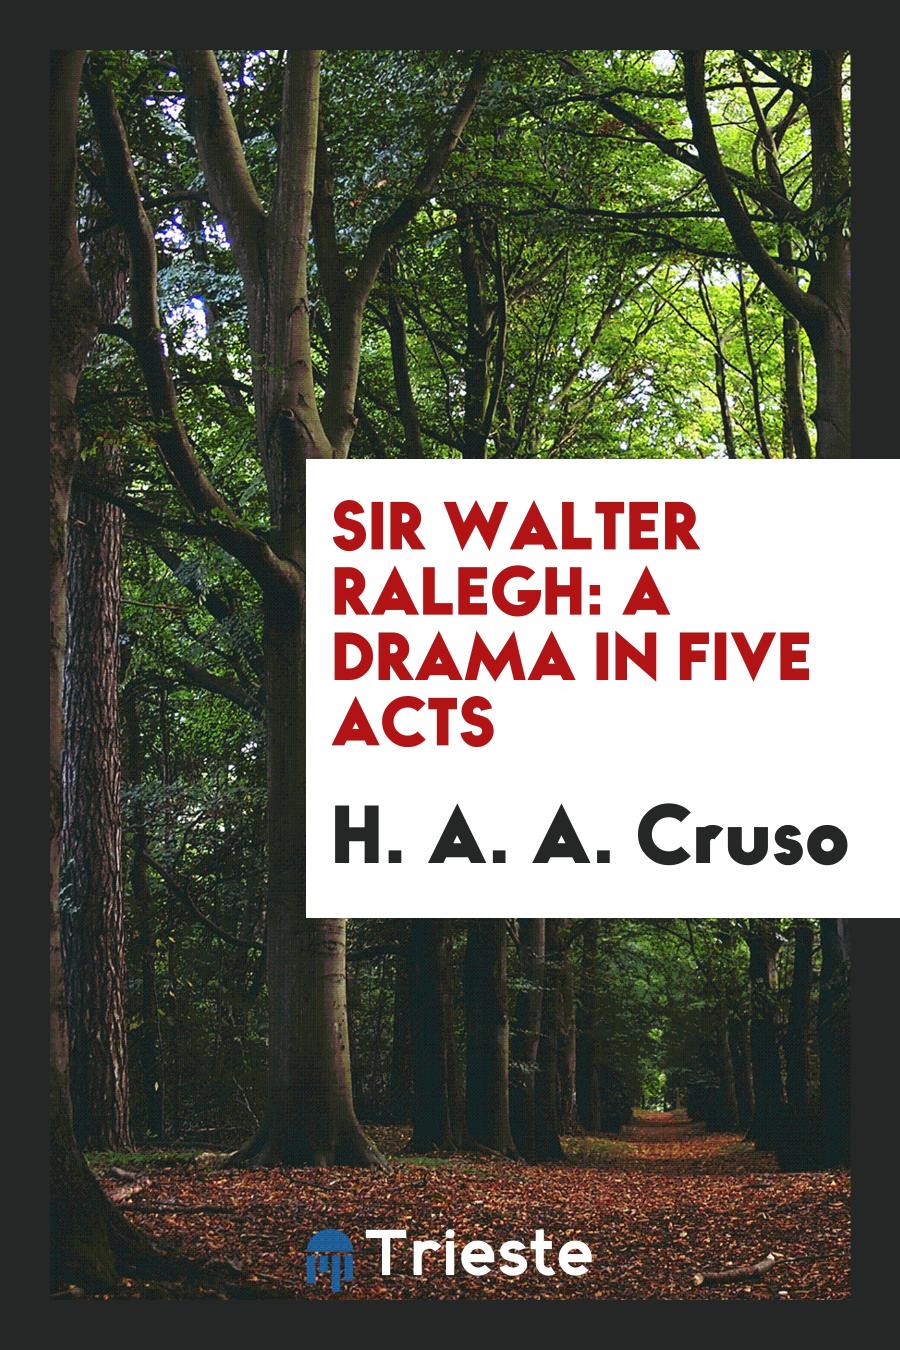 Sir Walter Ralegh: A Drama in Five Acts